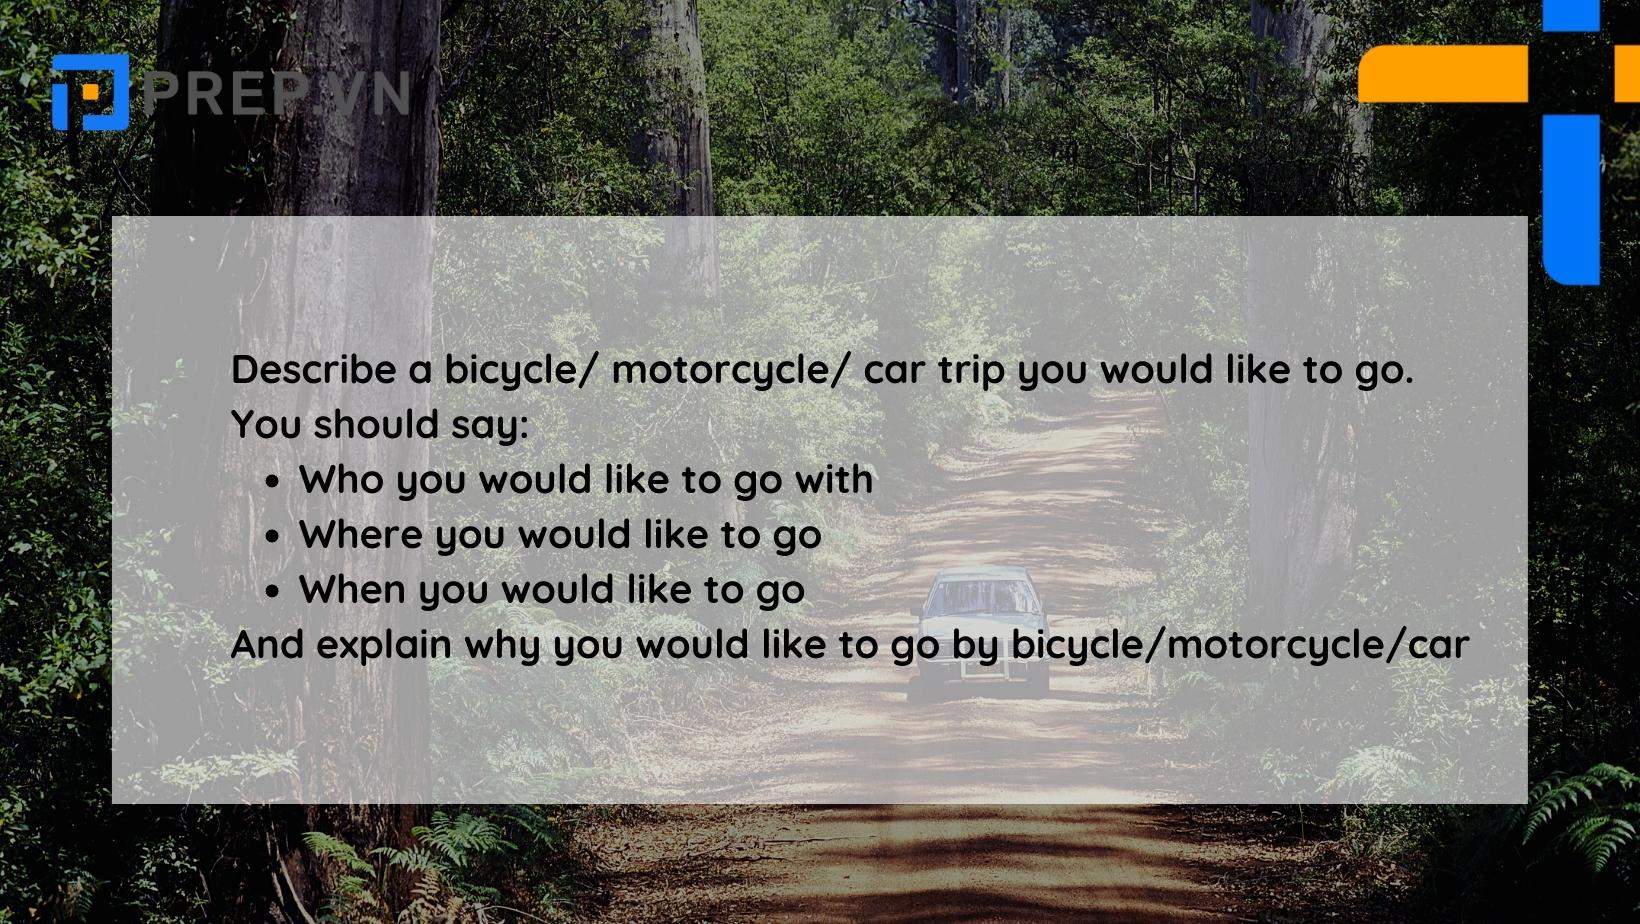 Đề bài: Describe a bicycle/ motorcycle/ car trip you would like to go